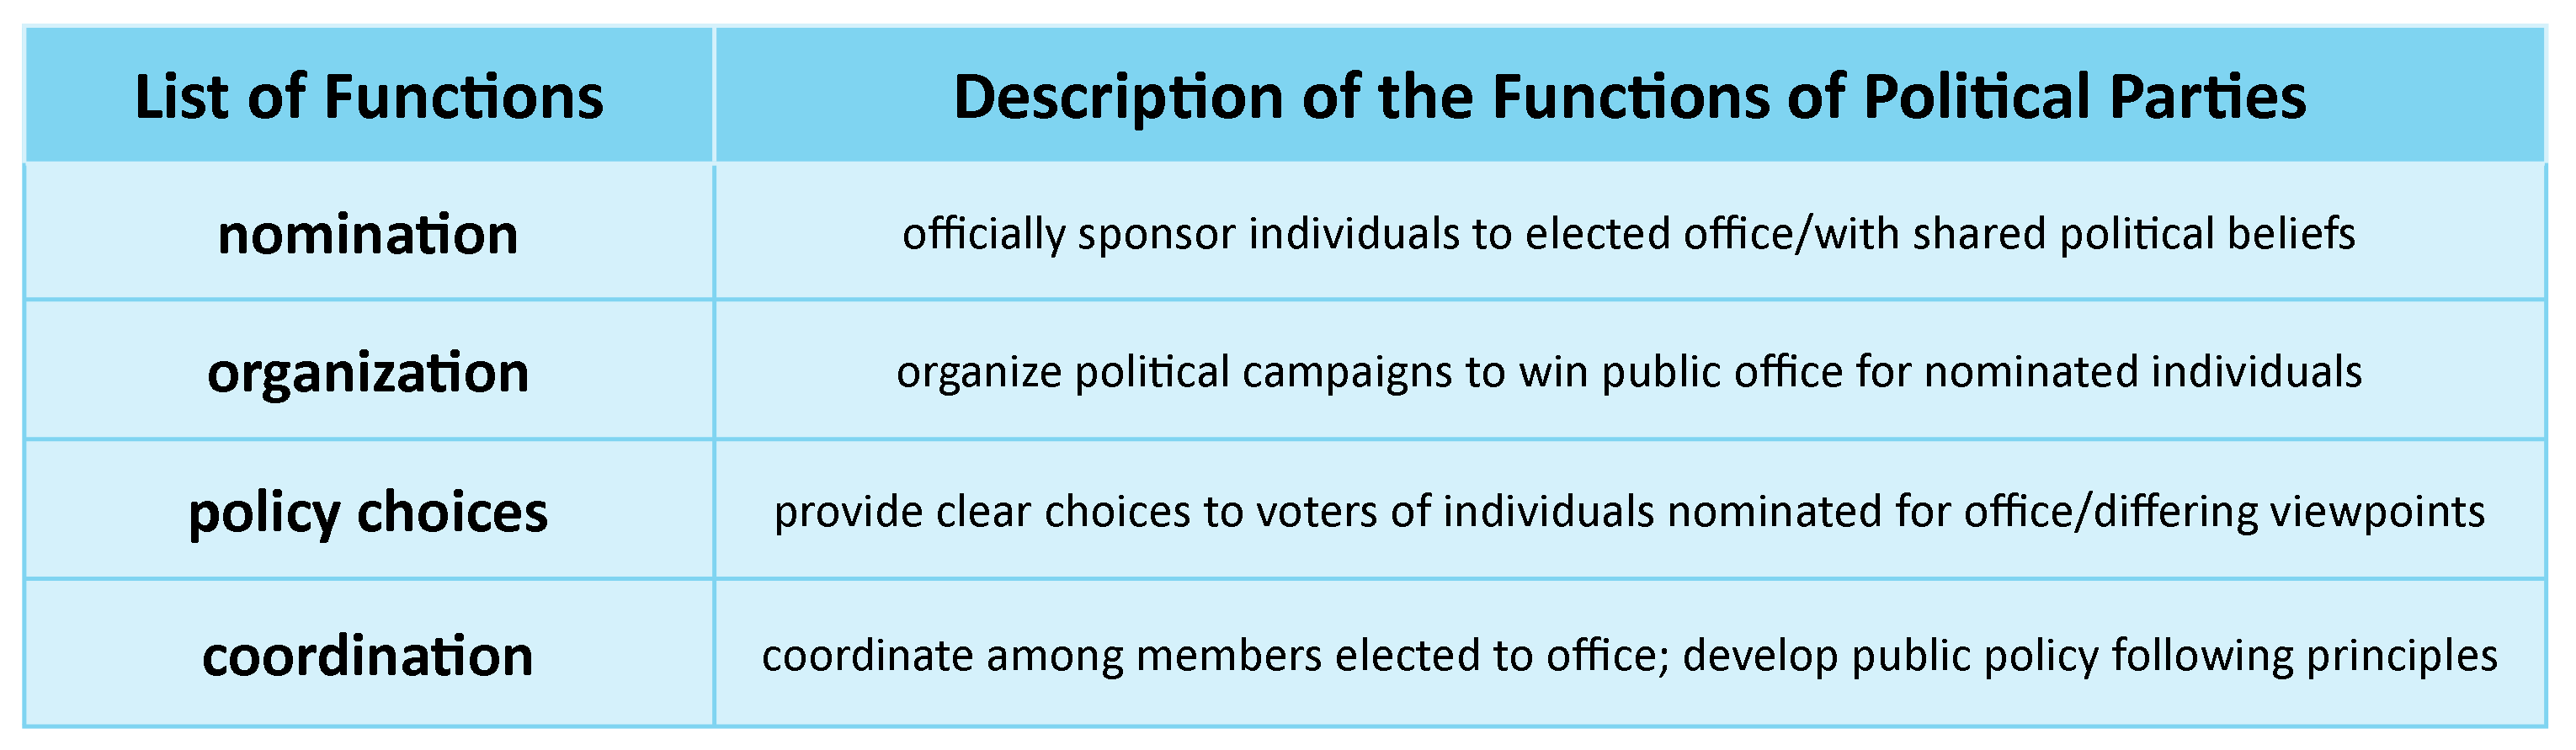 Chart reviewing the functions of political parties--nomination, organization, education and coordination.